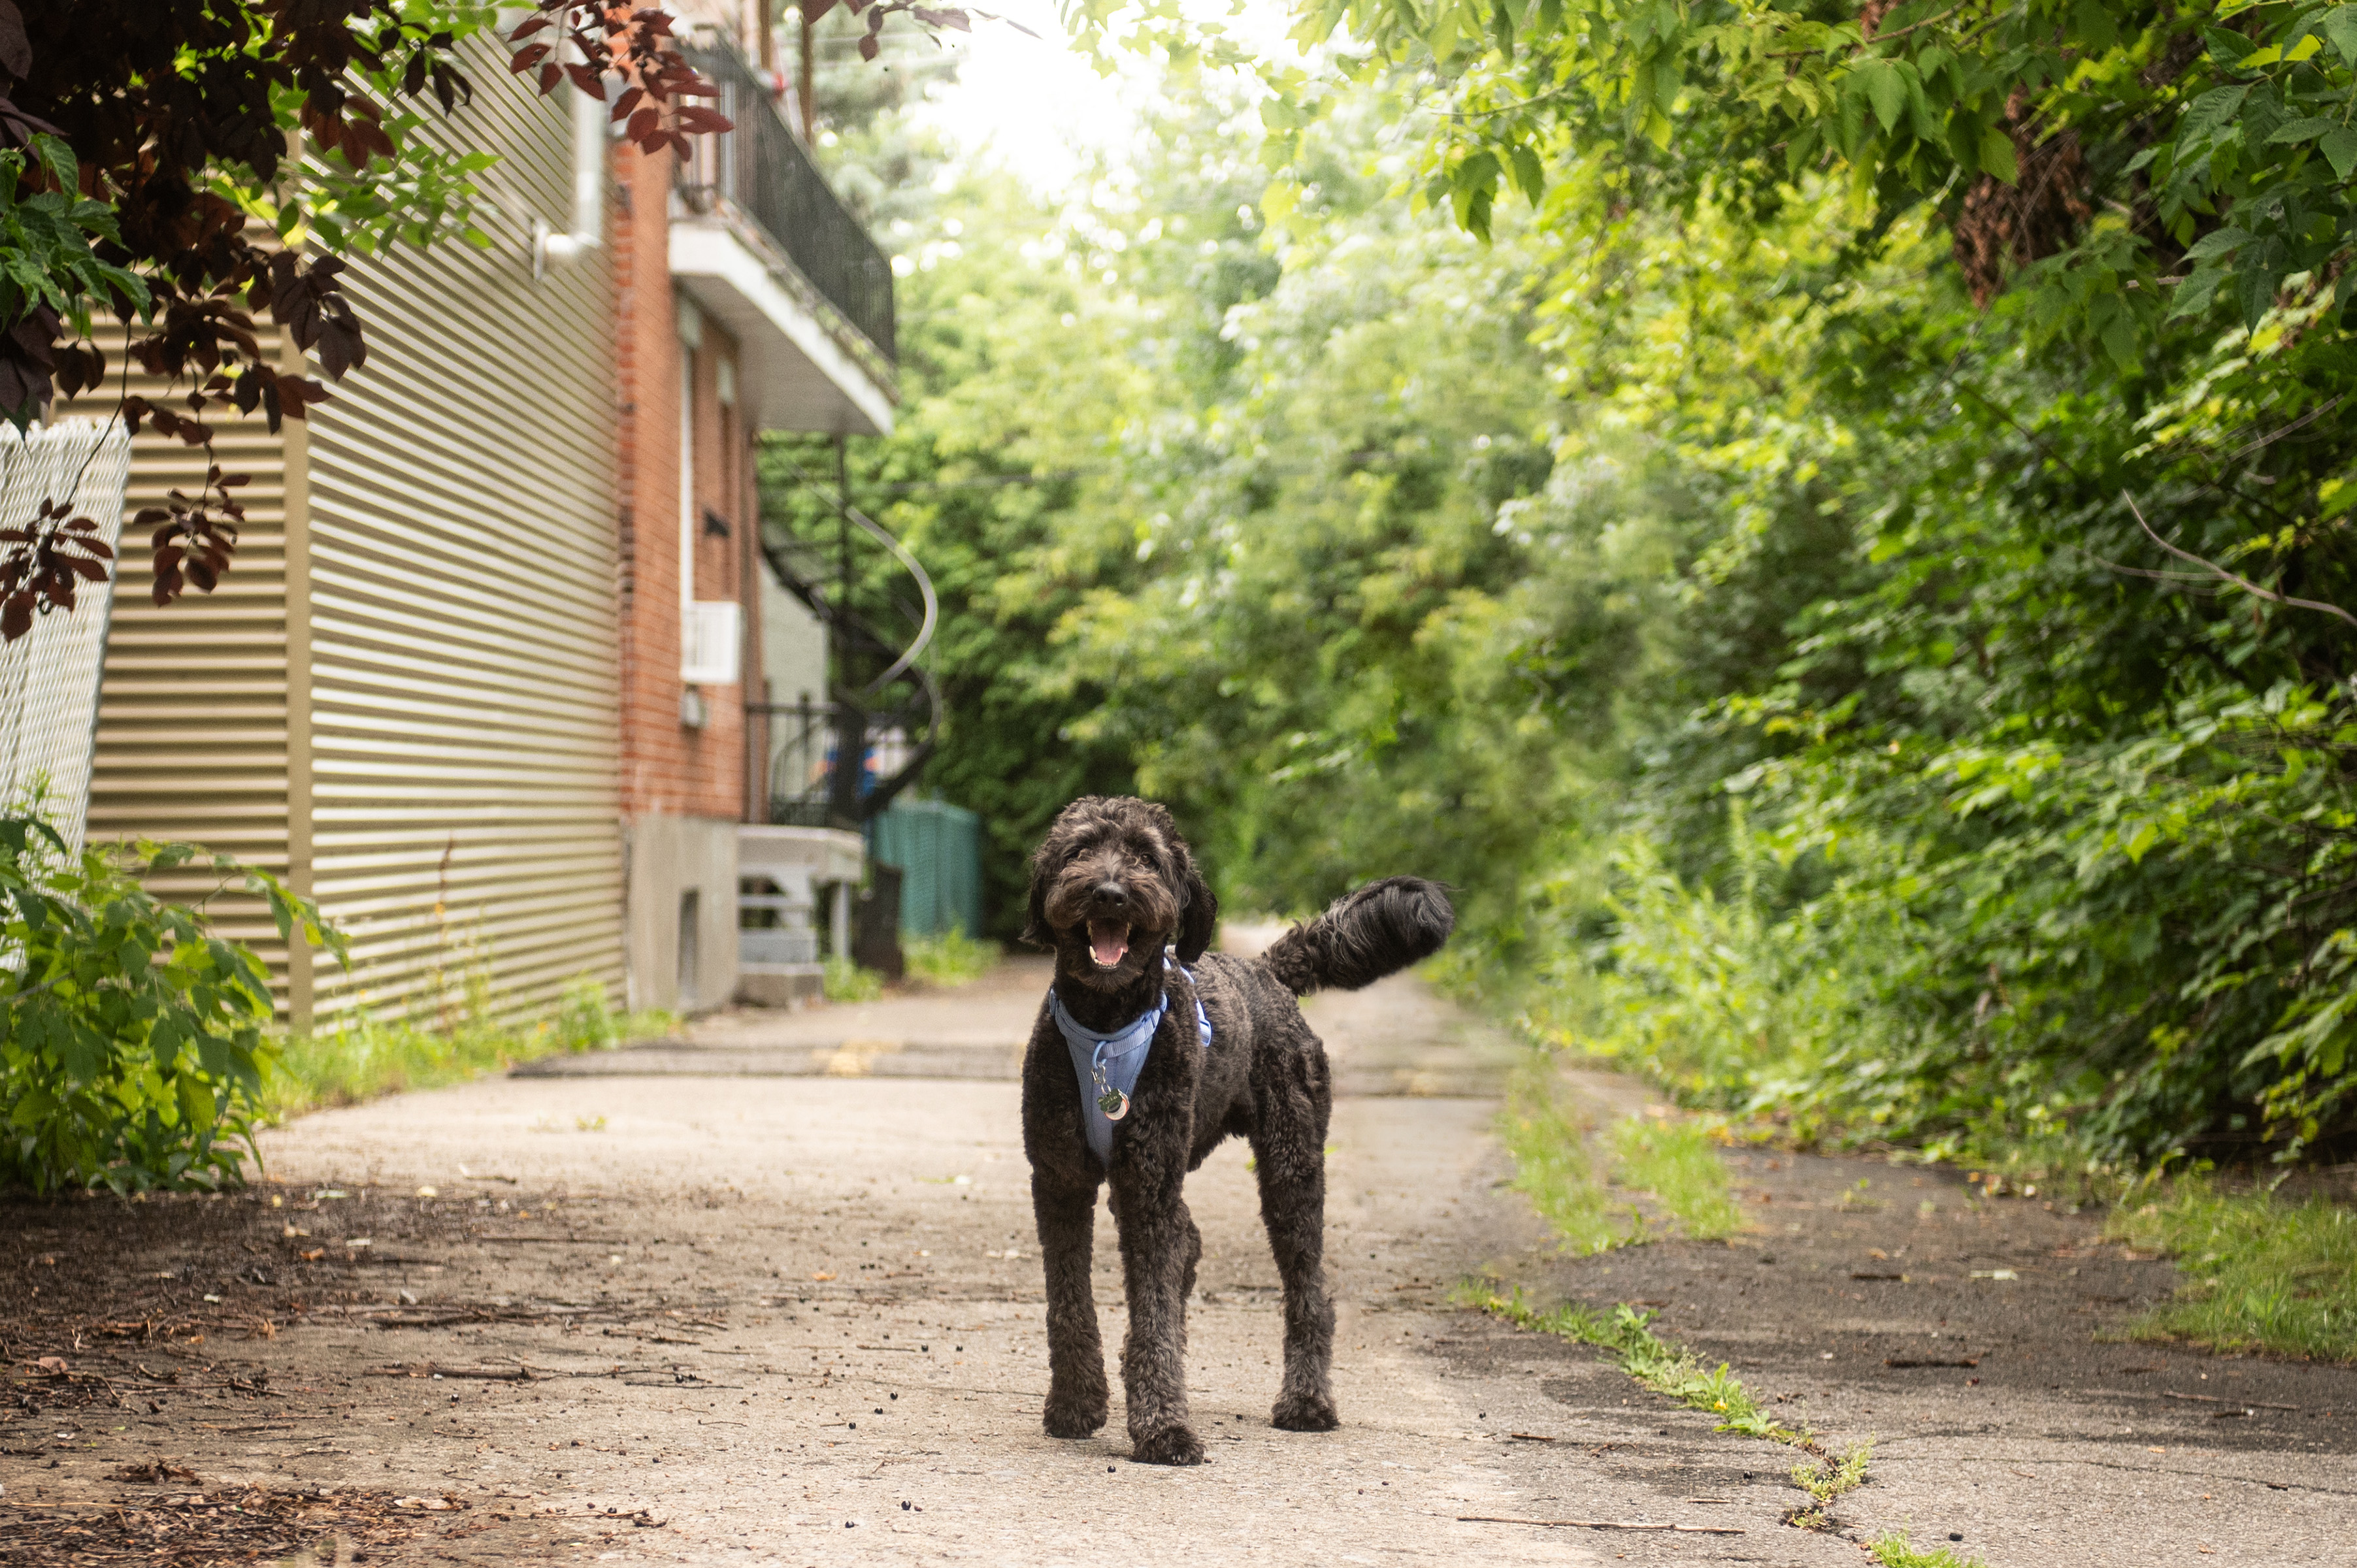 Gaetan, a black doodle collie mix stands in a green alley way with lots of trees and shrubs, happily looking at the camera